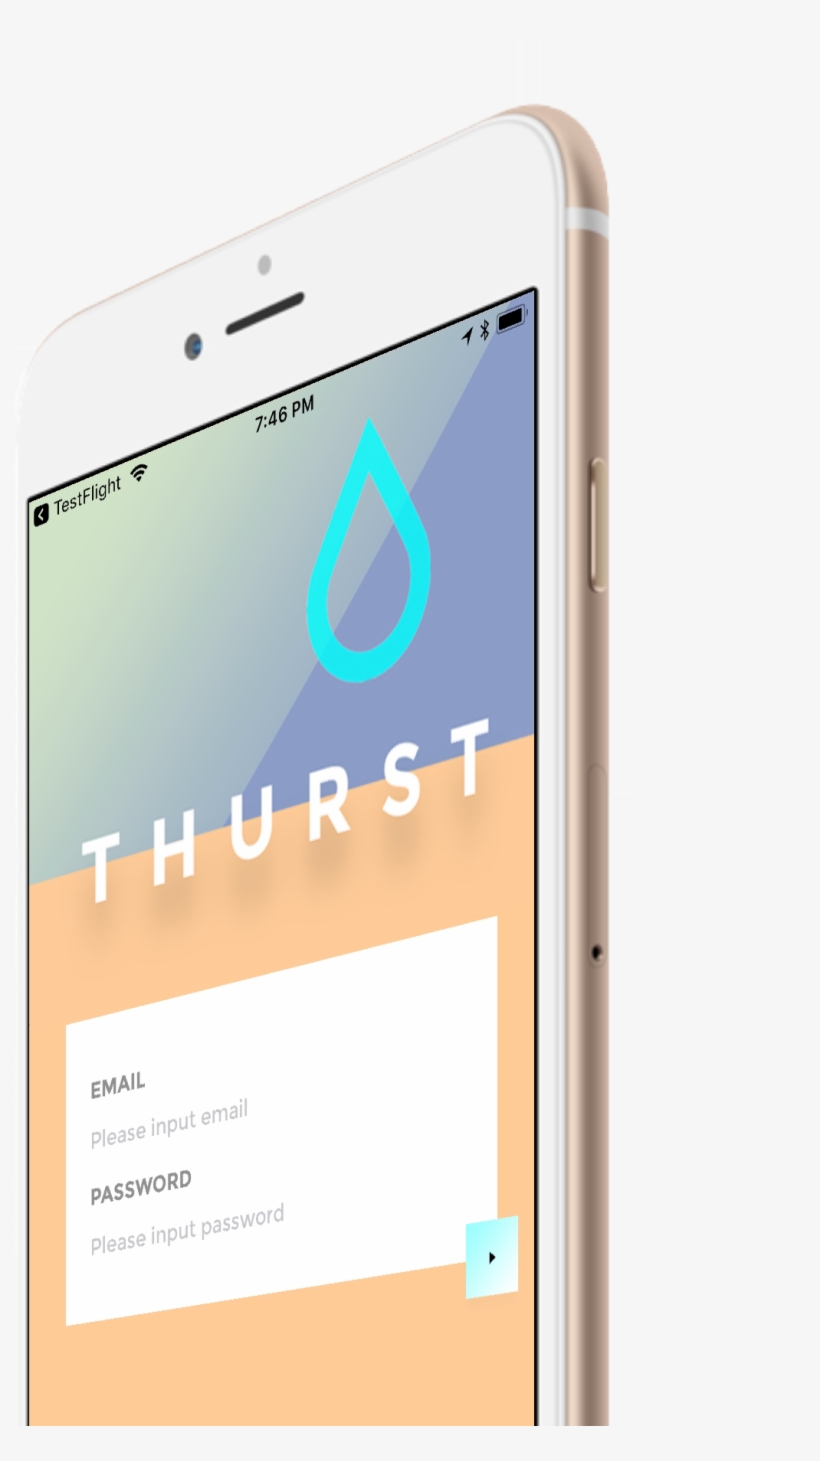 Your Feedback Has Helped Thurst Improve Many Aspects - Iphone, transparent png #9806288